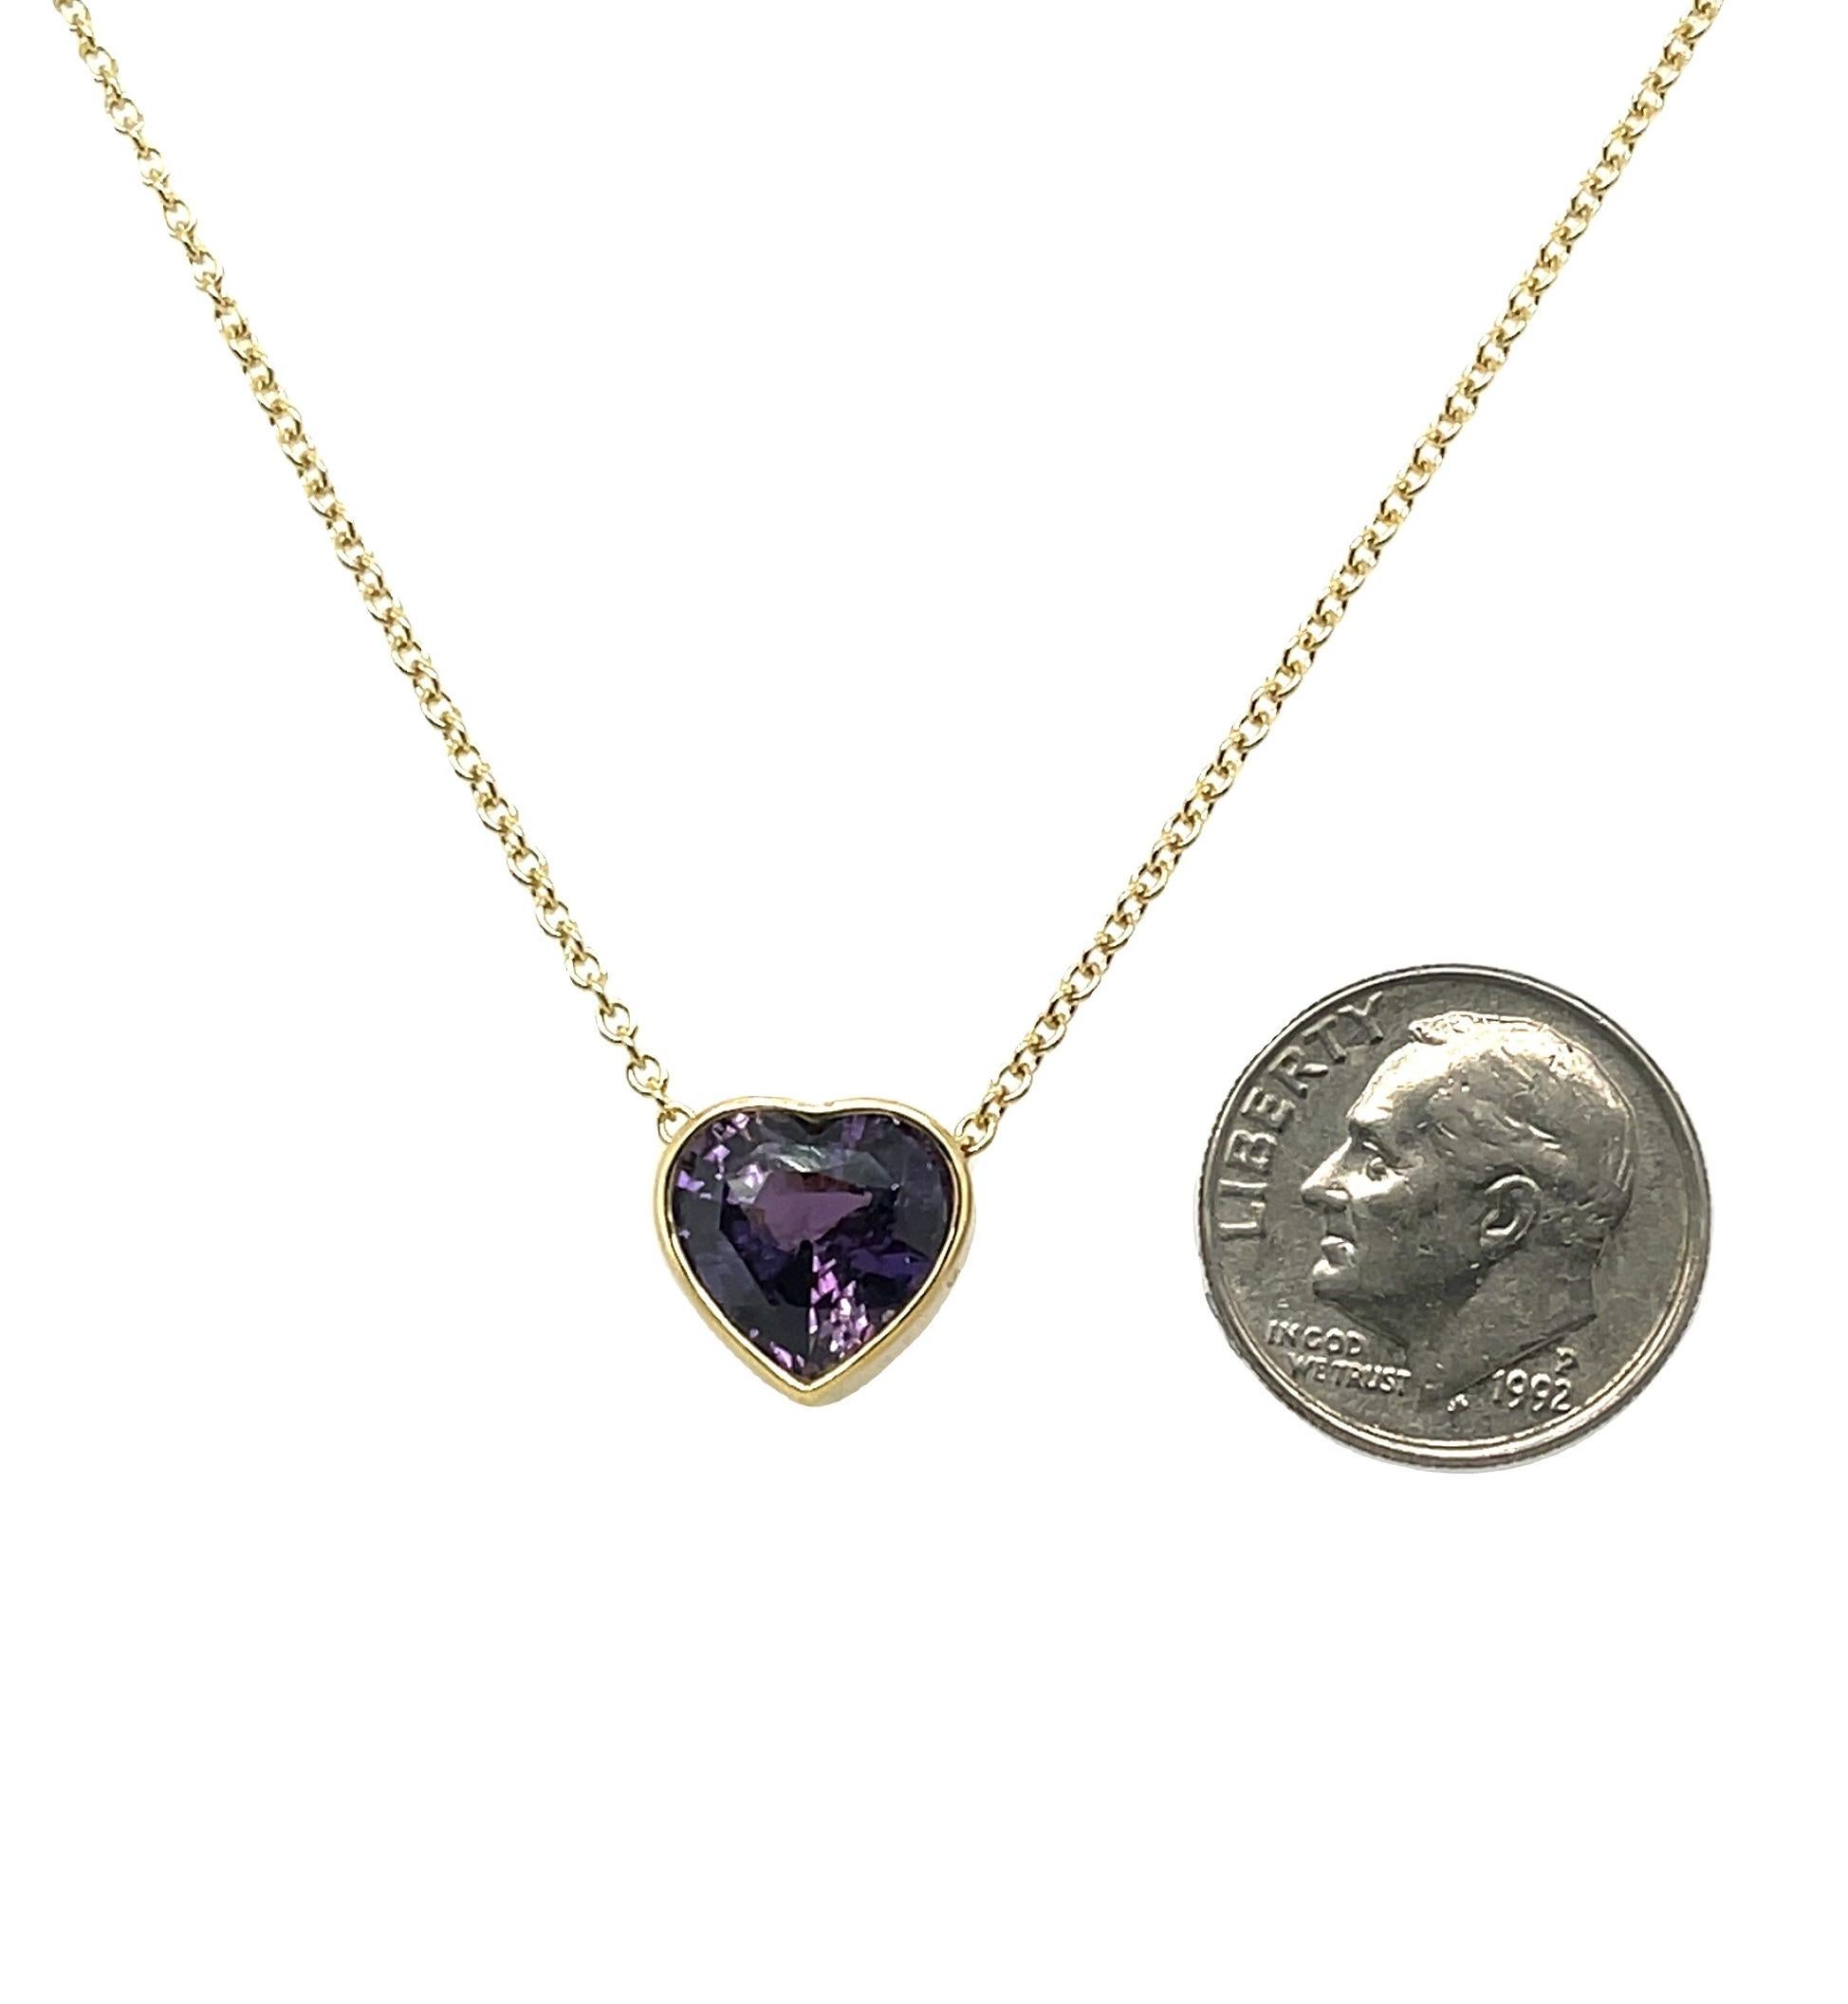 GIA Certified Unheated 3.56 Carat Purple Sapphire Heart Necklace in 18k Gold For Sale 2